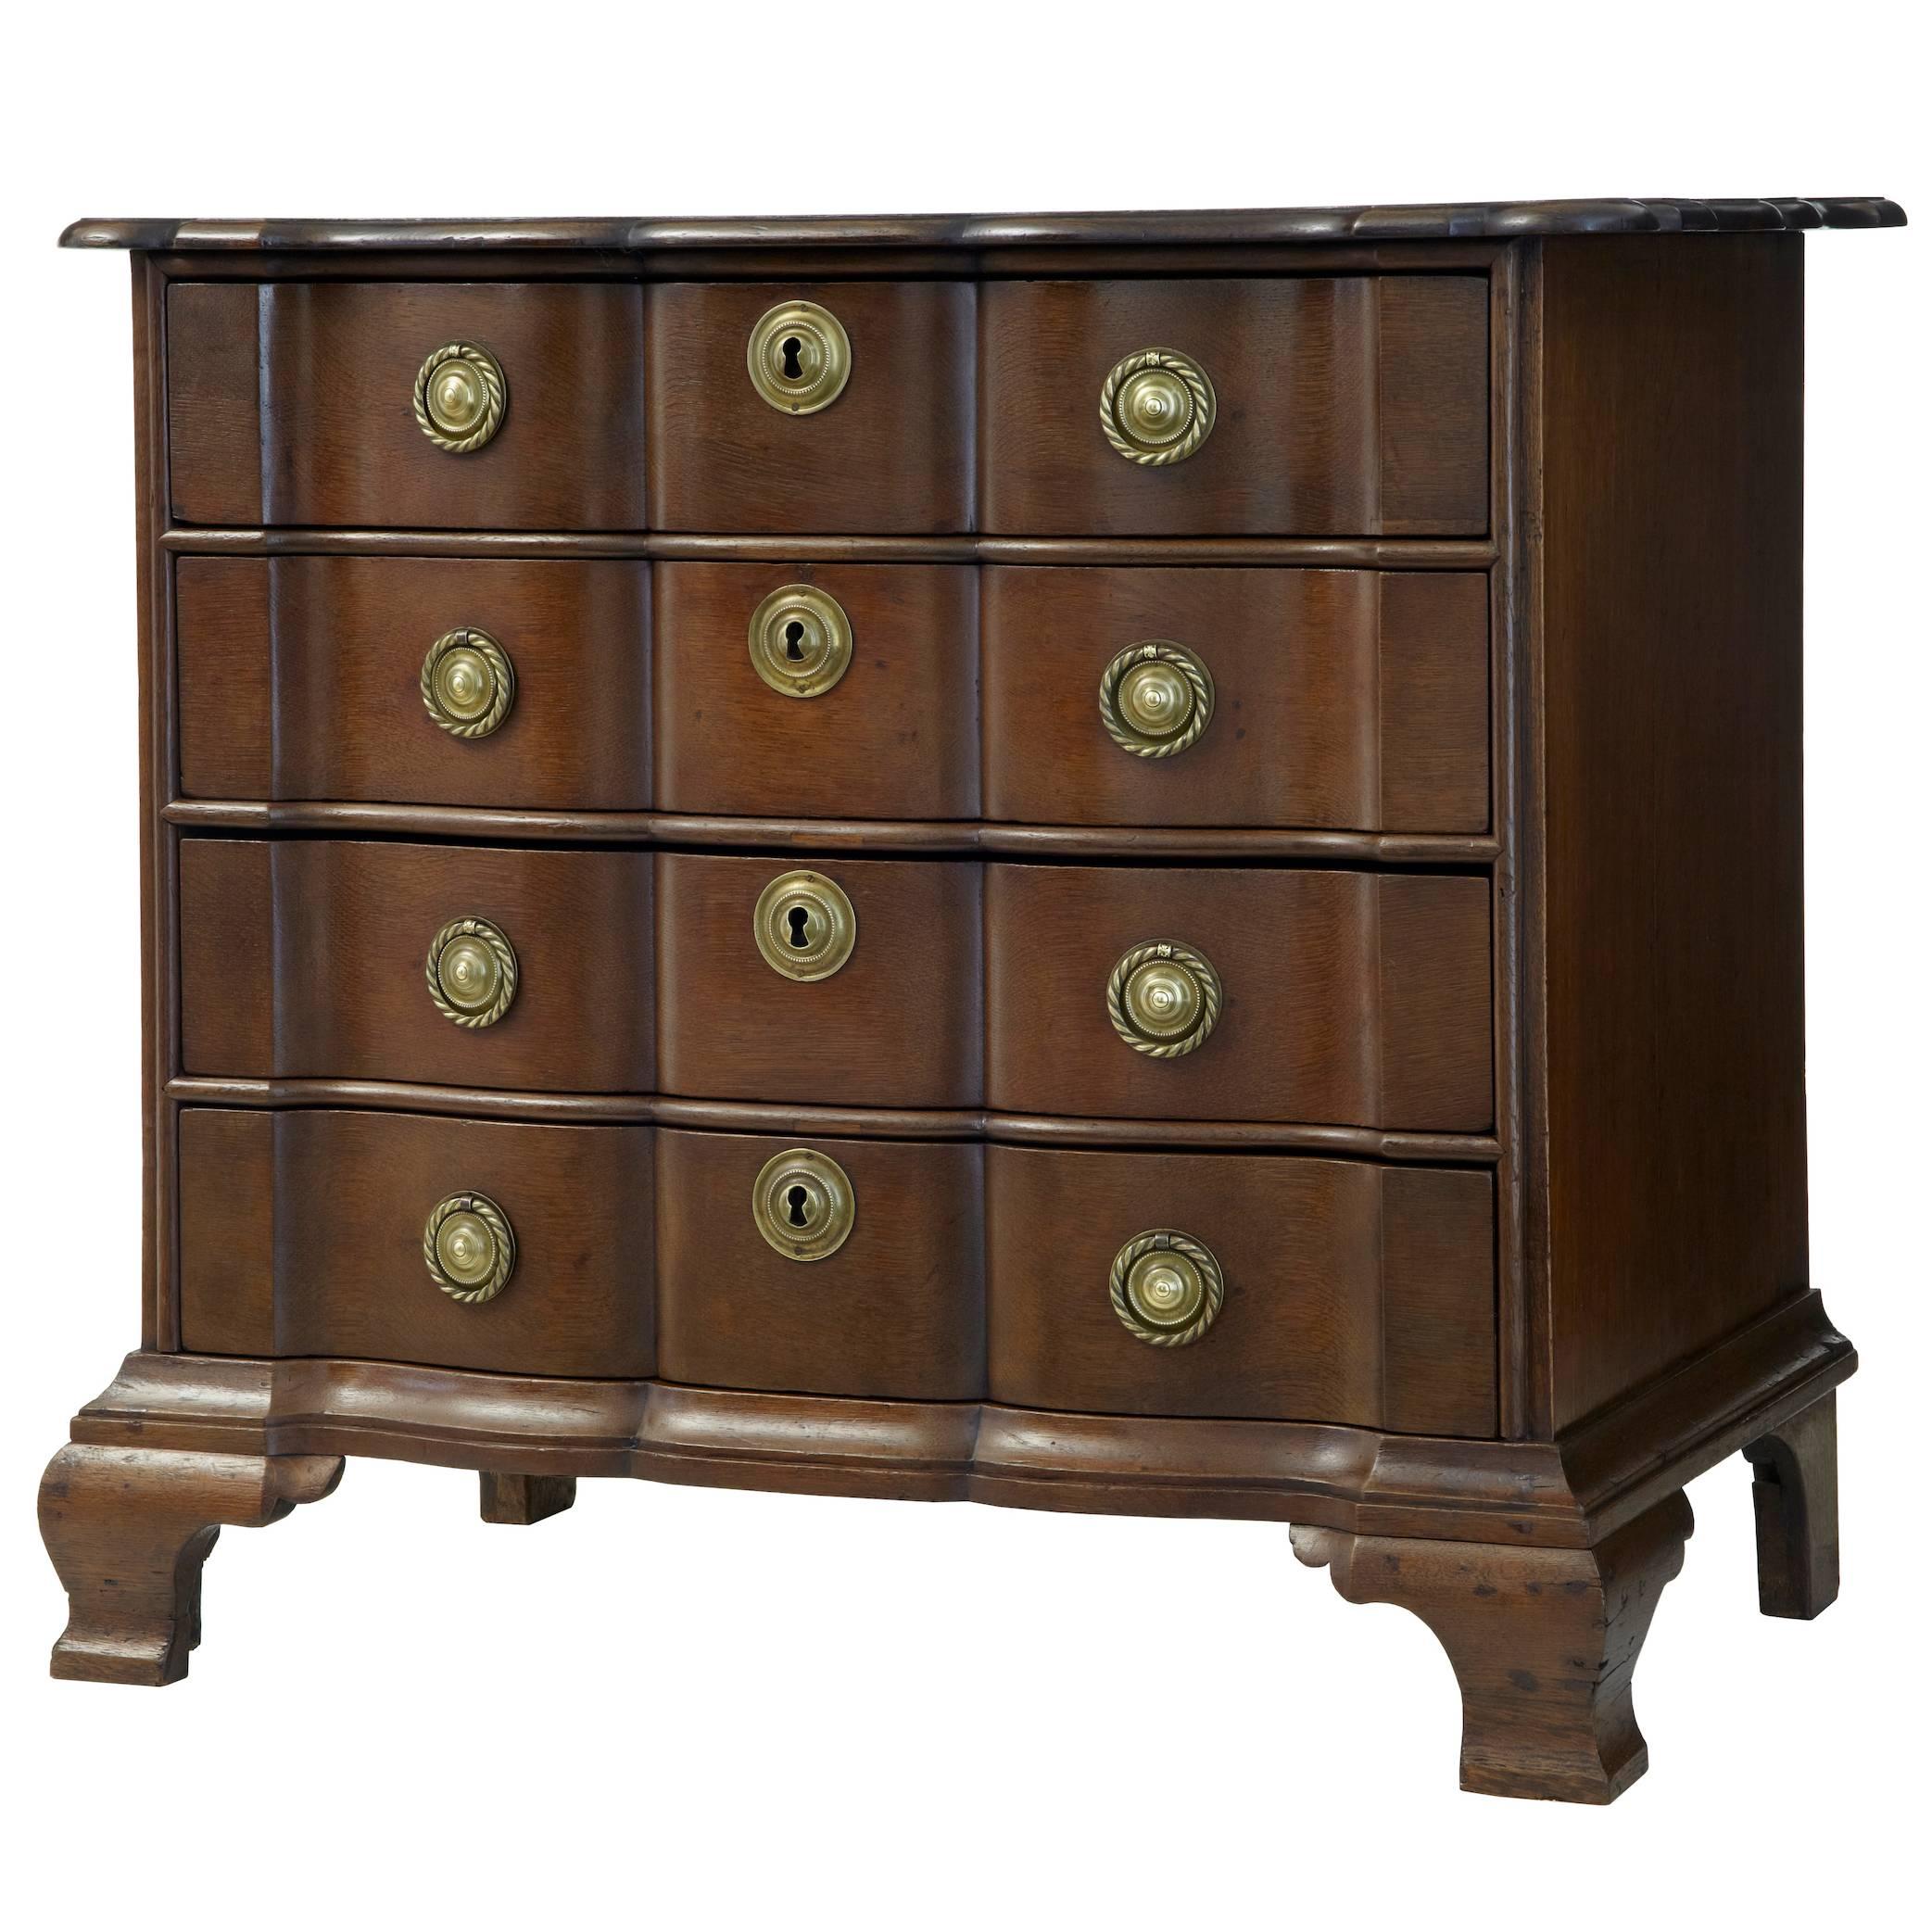 19th Century, Dutch Shaped Oak Chest of Drawers Commode